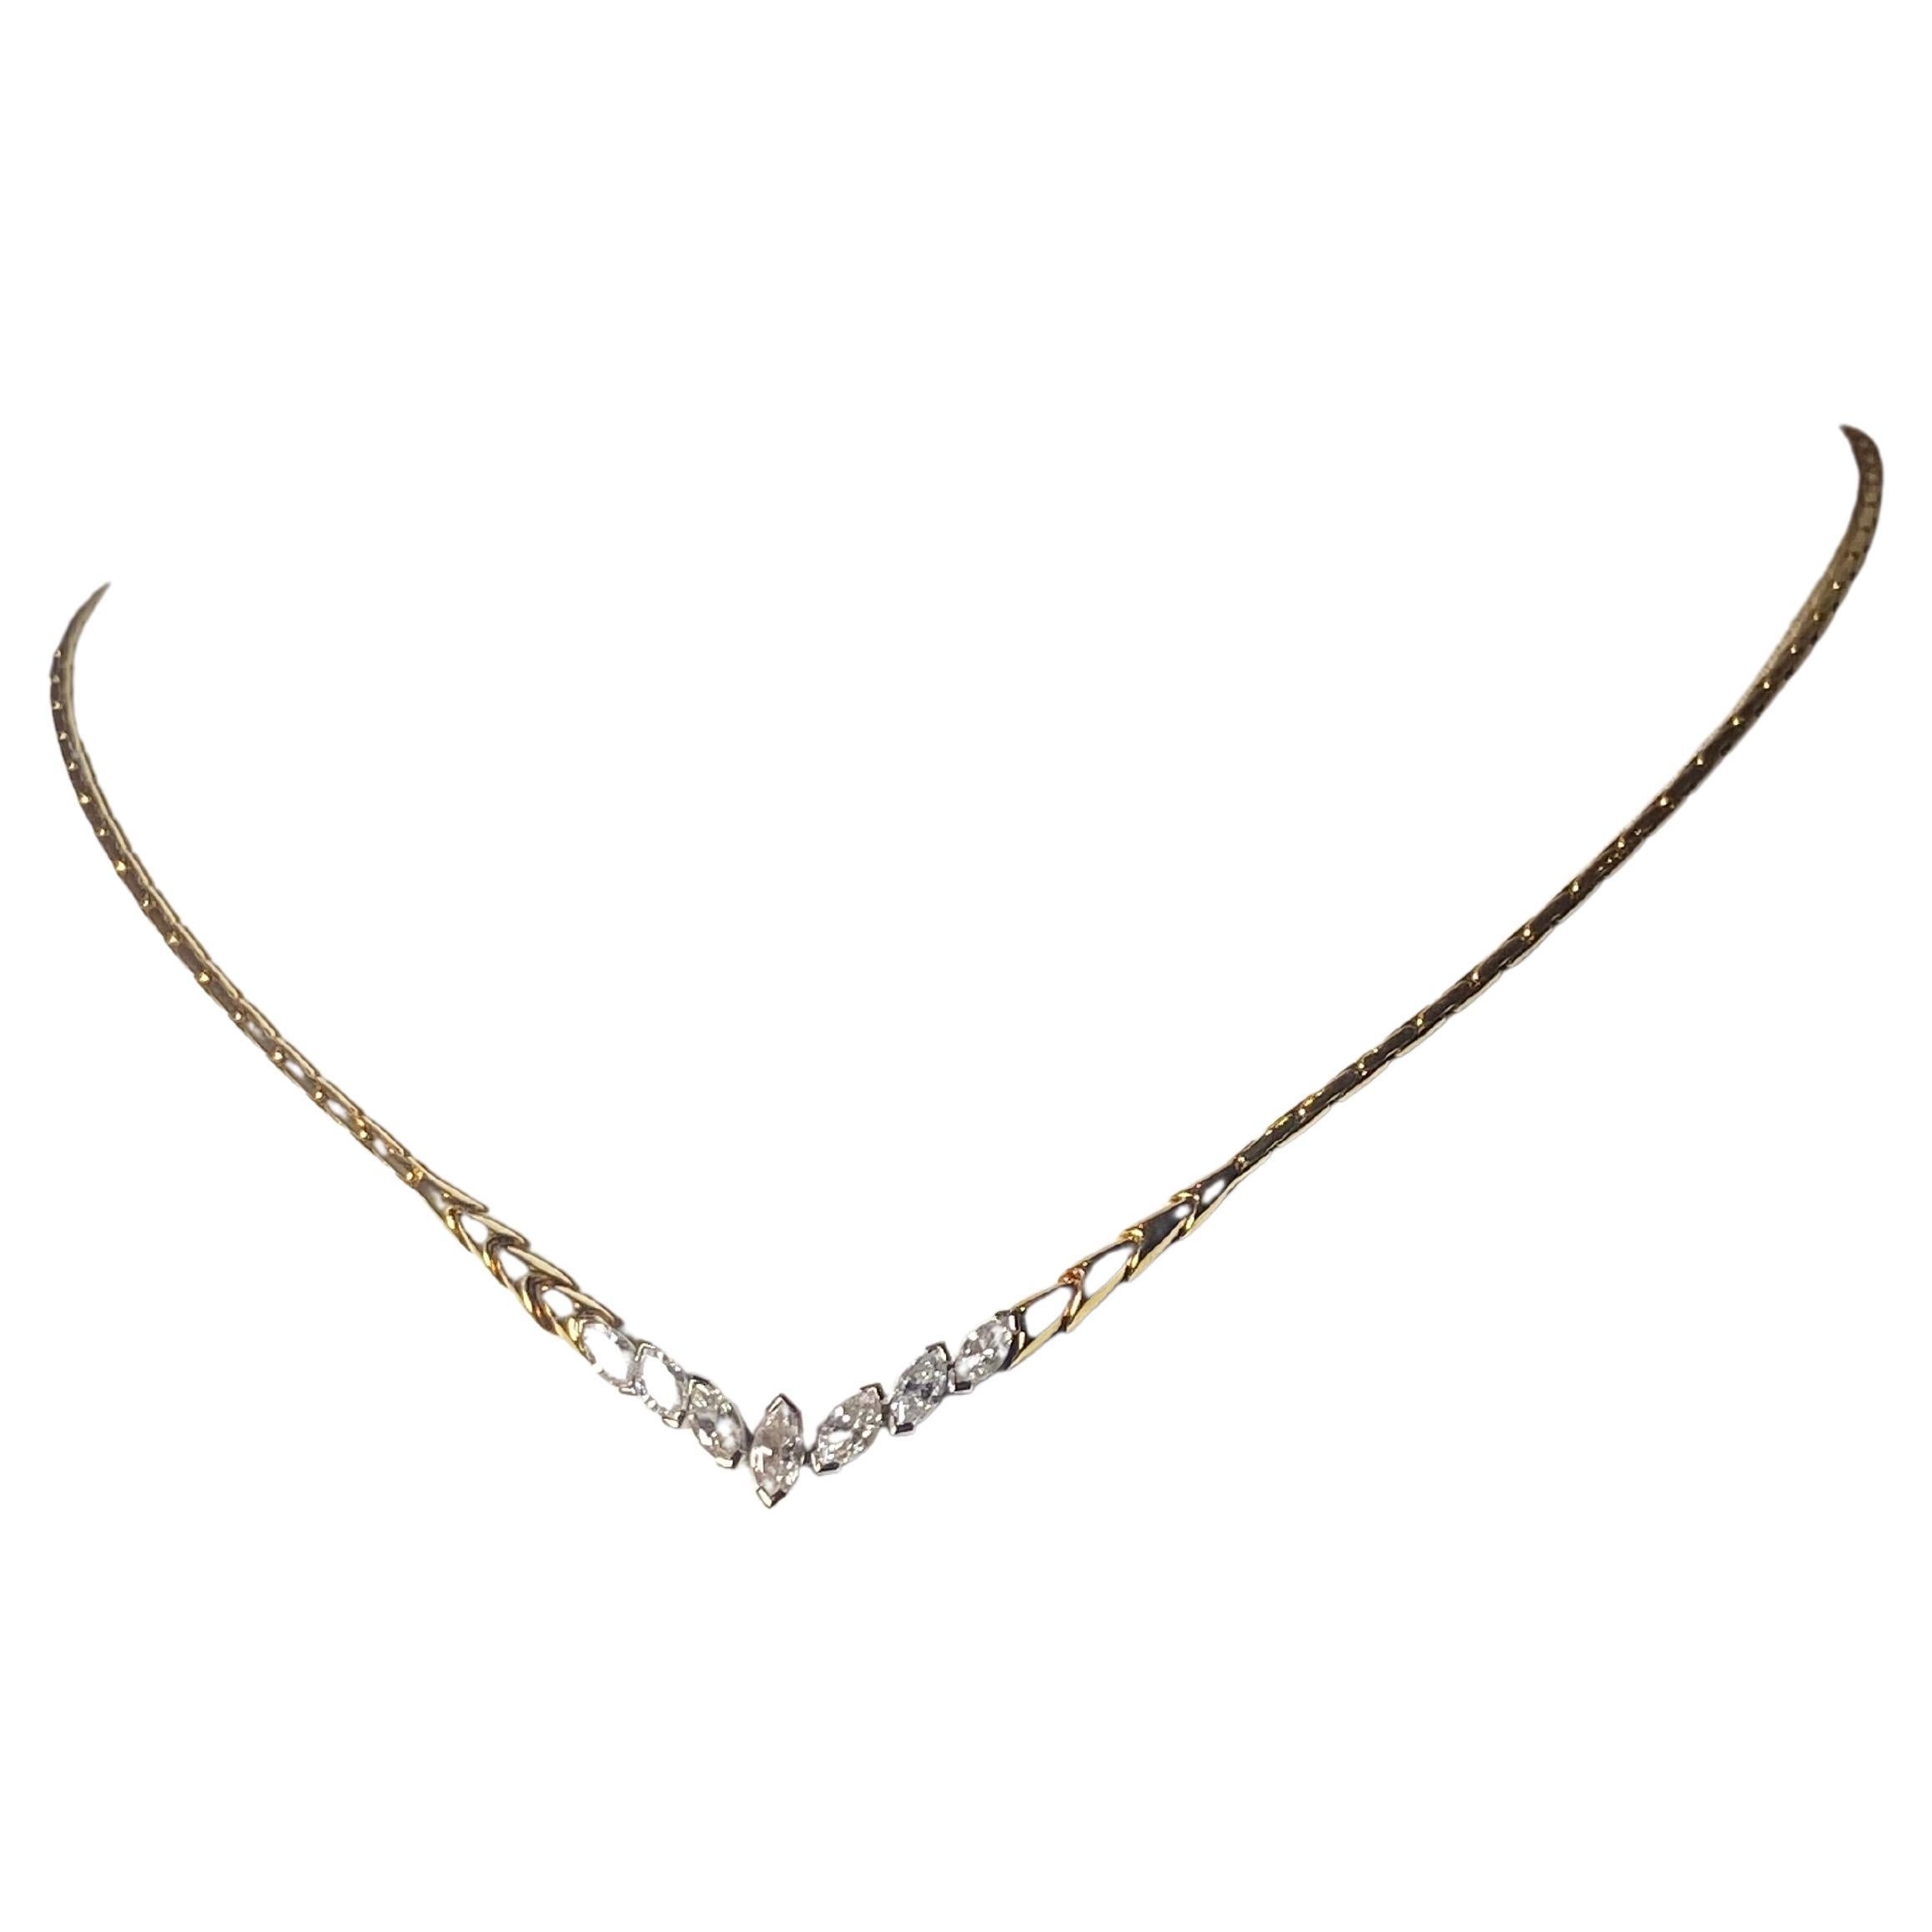 1.00ct Marquise Diamond (x 7) Necklace in 18K Yellow Gold, valued at $5900. For Sale